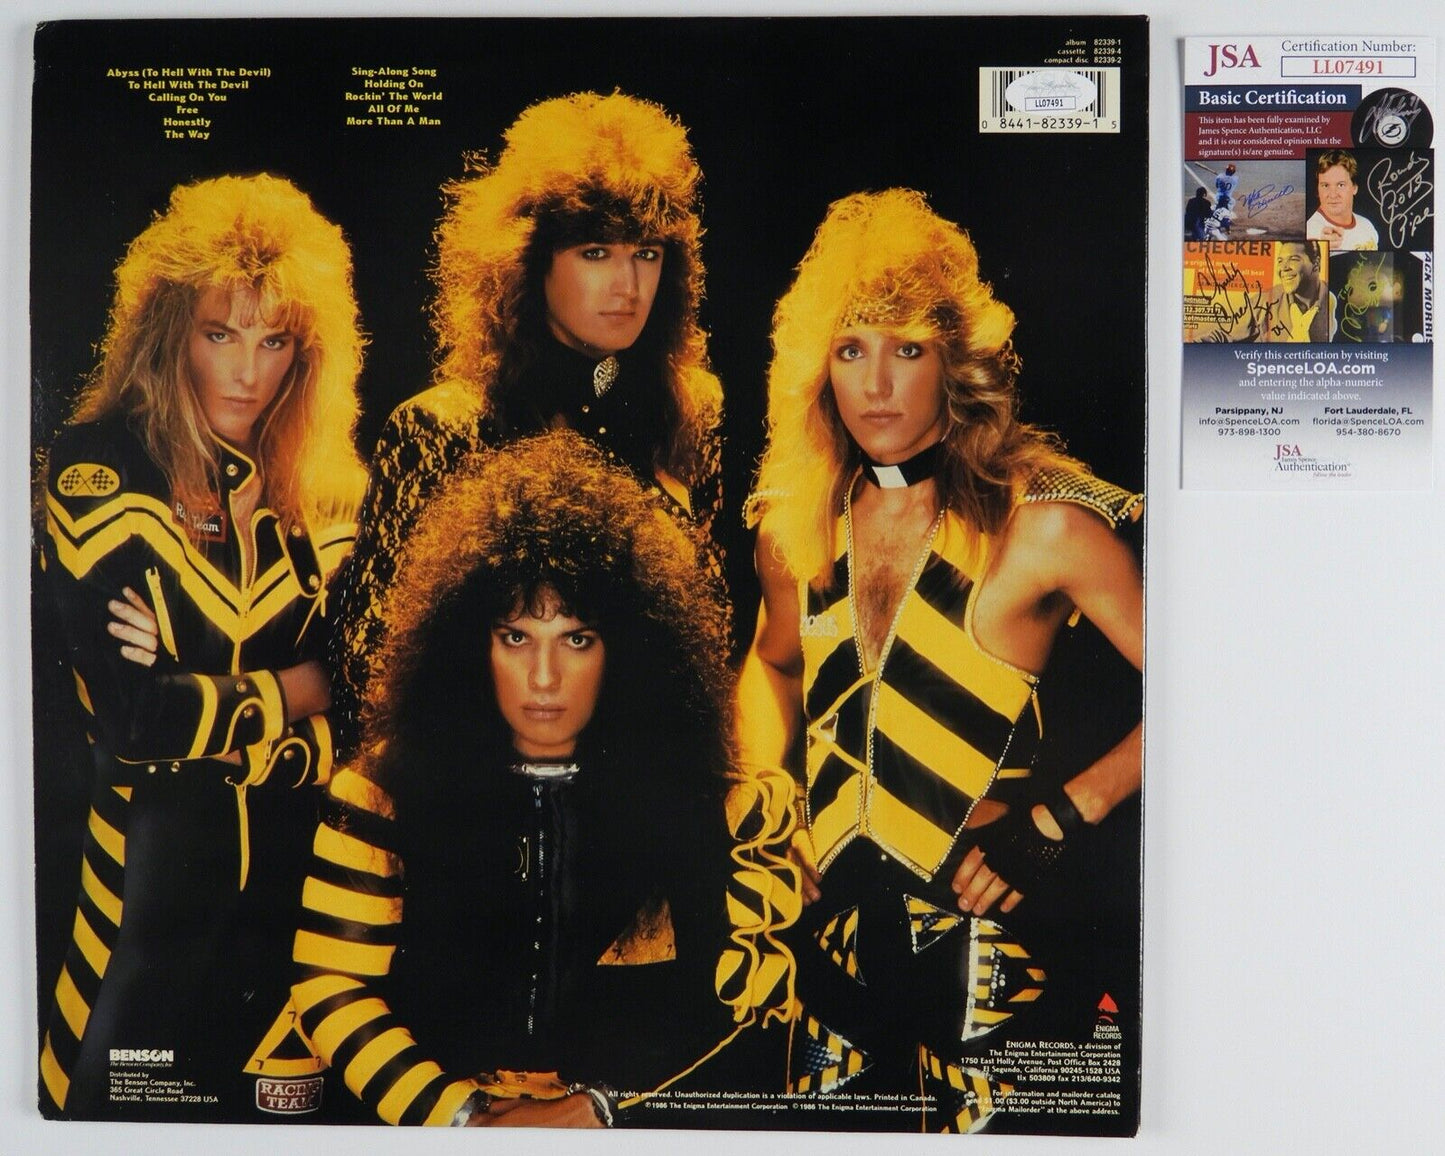 Stryper Fully Signed Autograph JSA Record Album Vinyl To Hell With The Devil